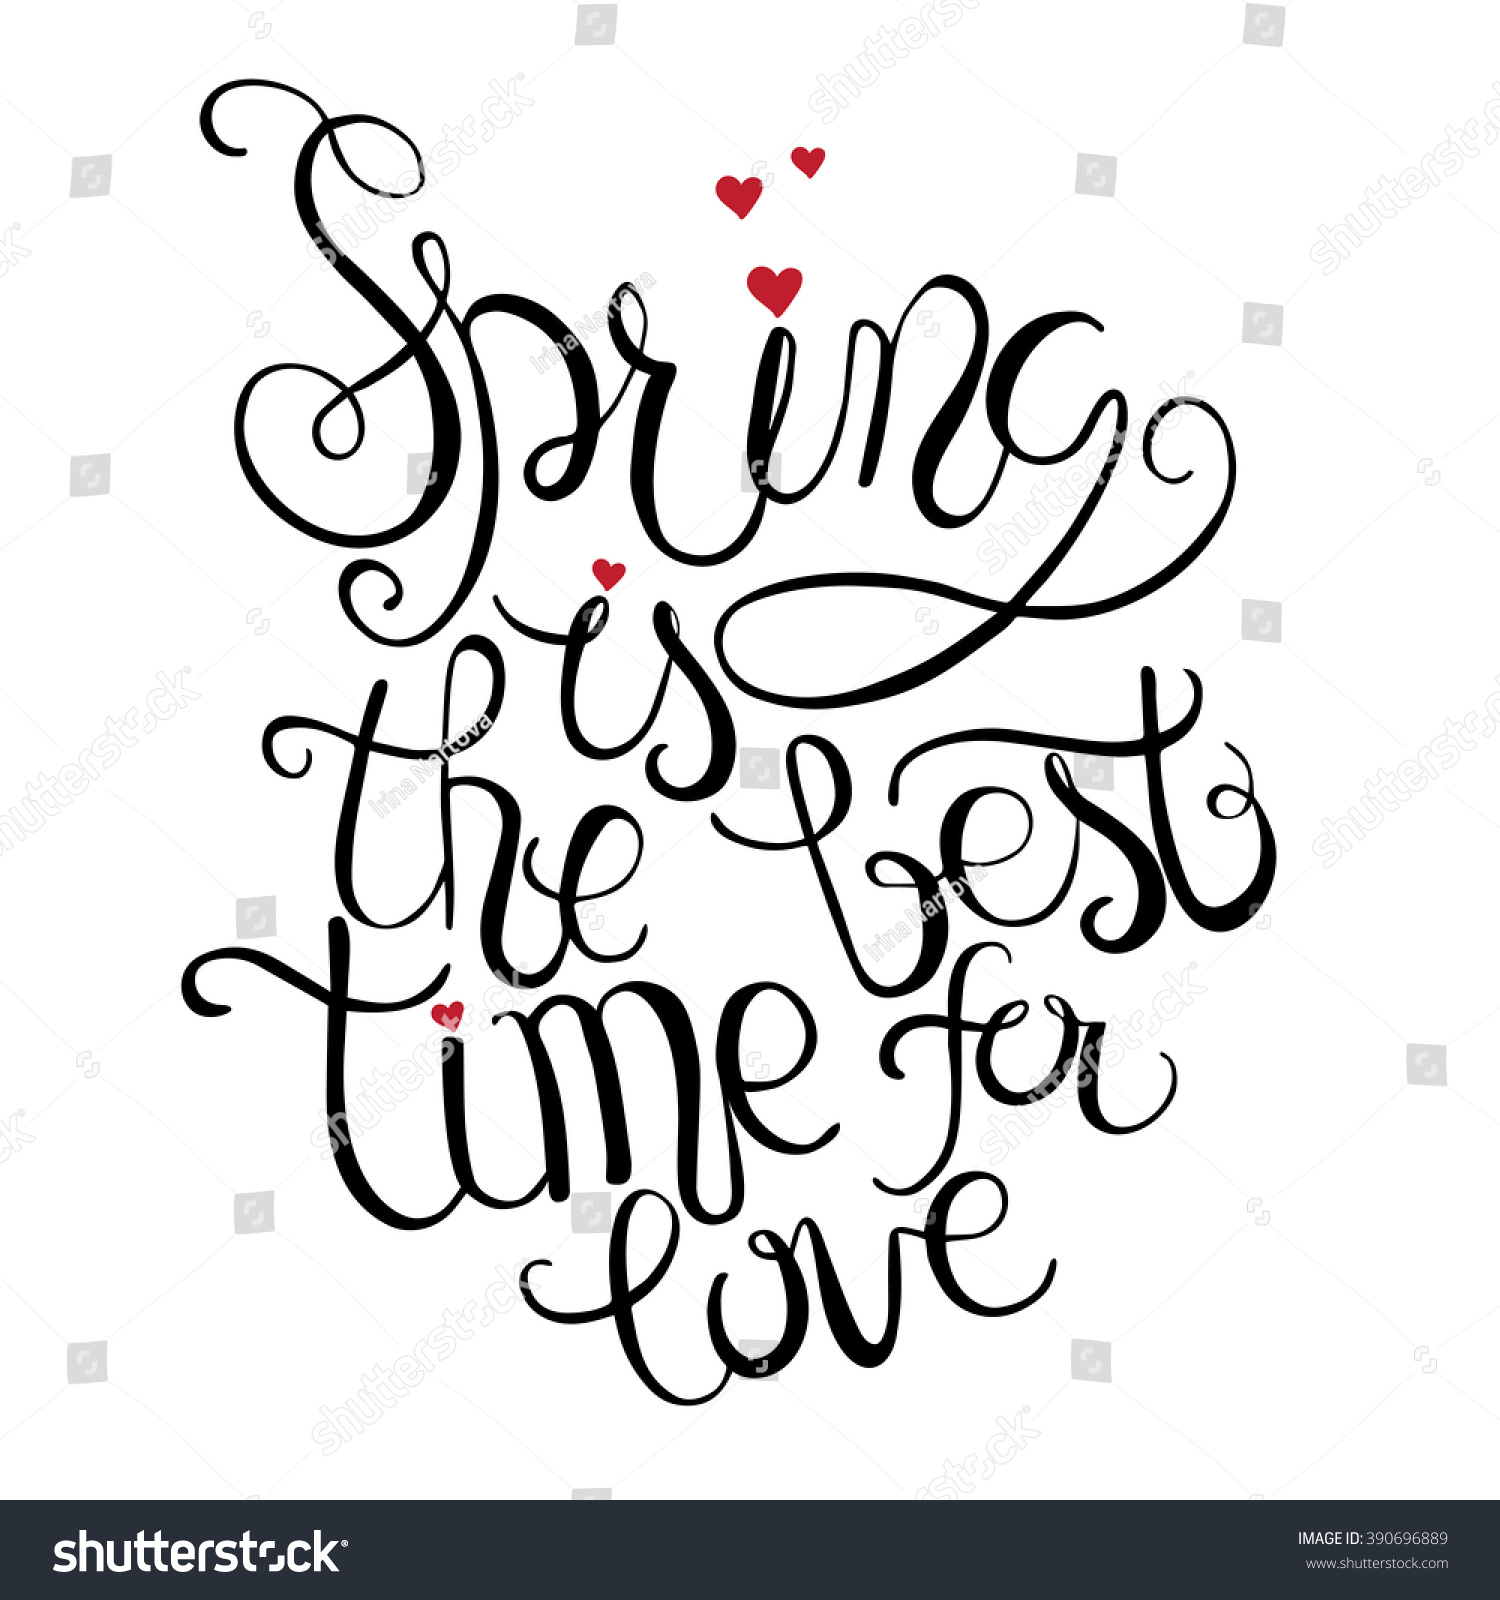 Spring is the bast time for love Hand drawn calligraphic inspiration quote